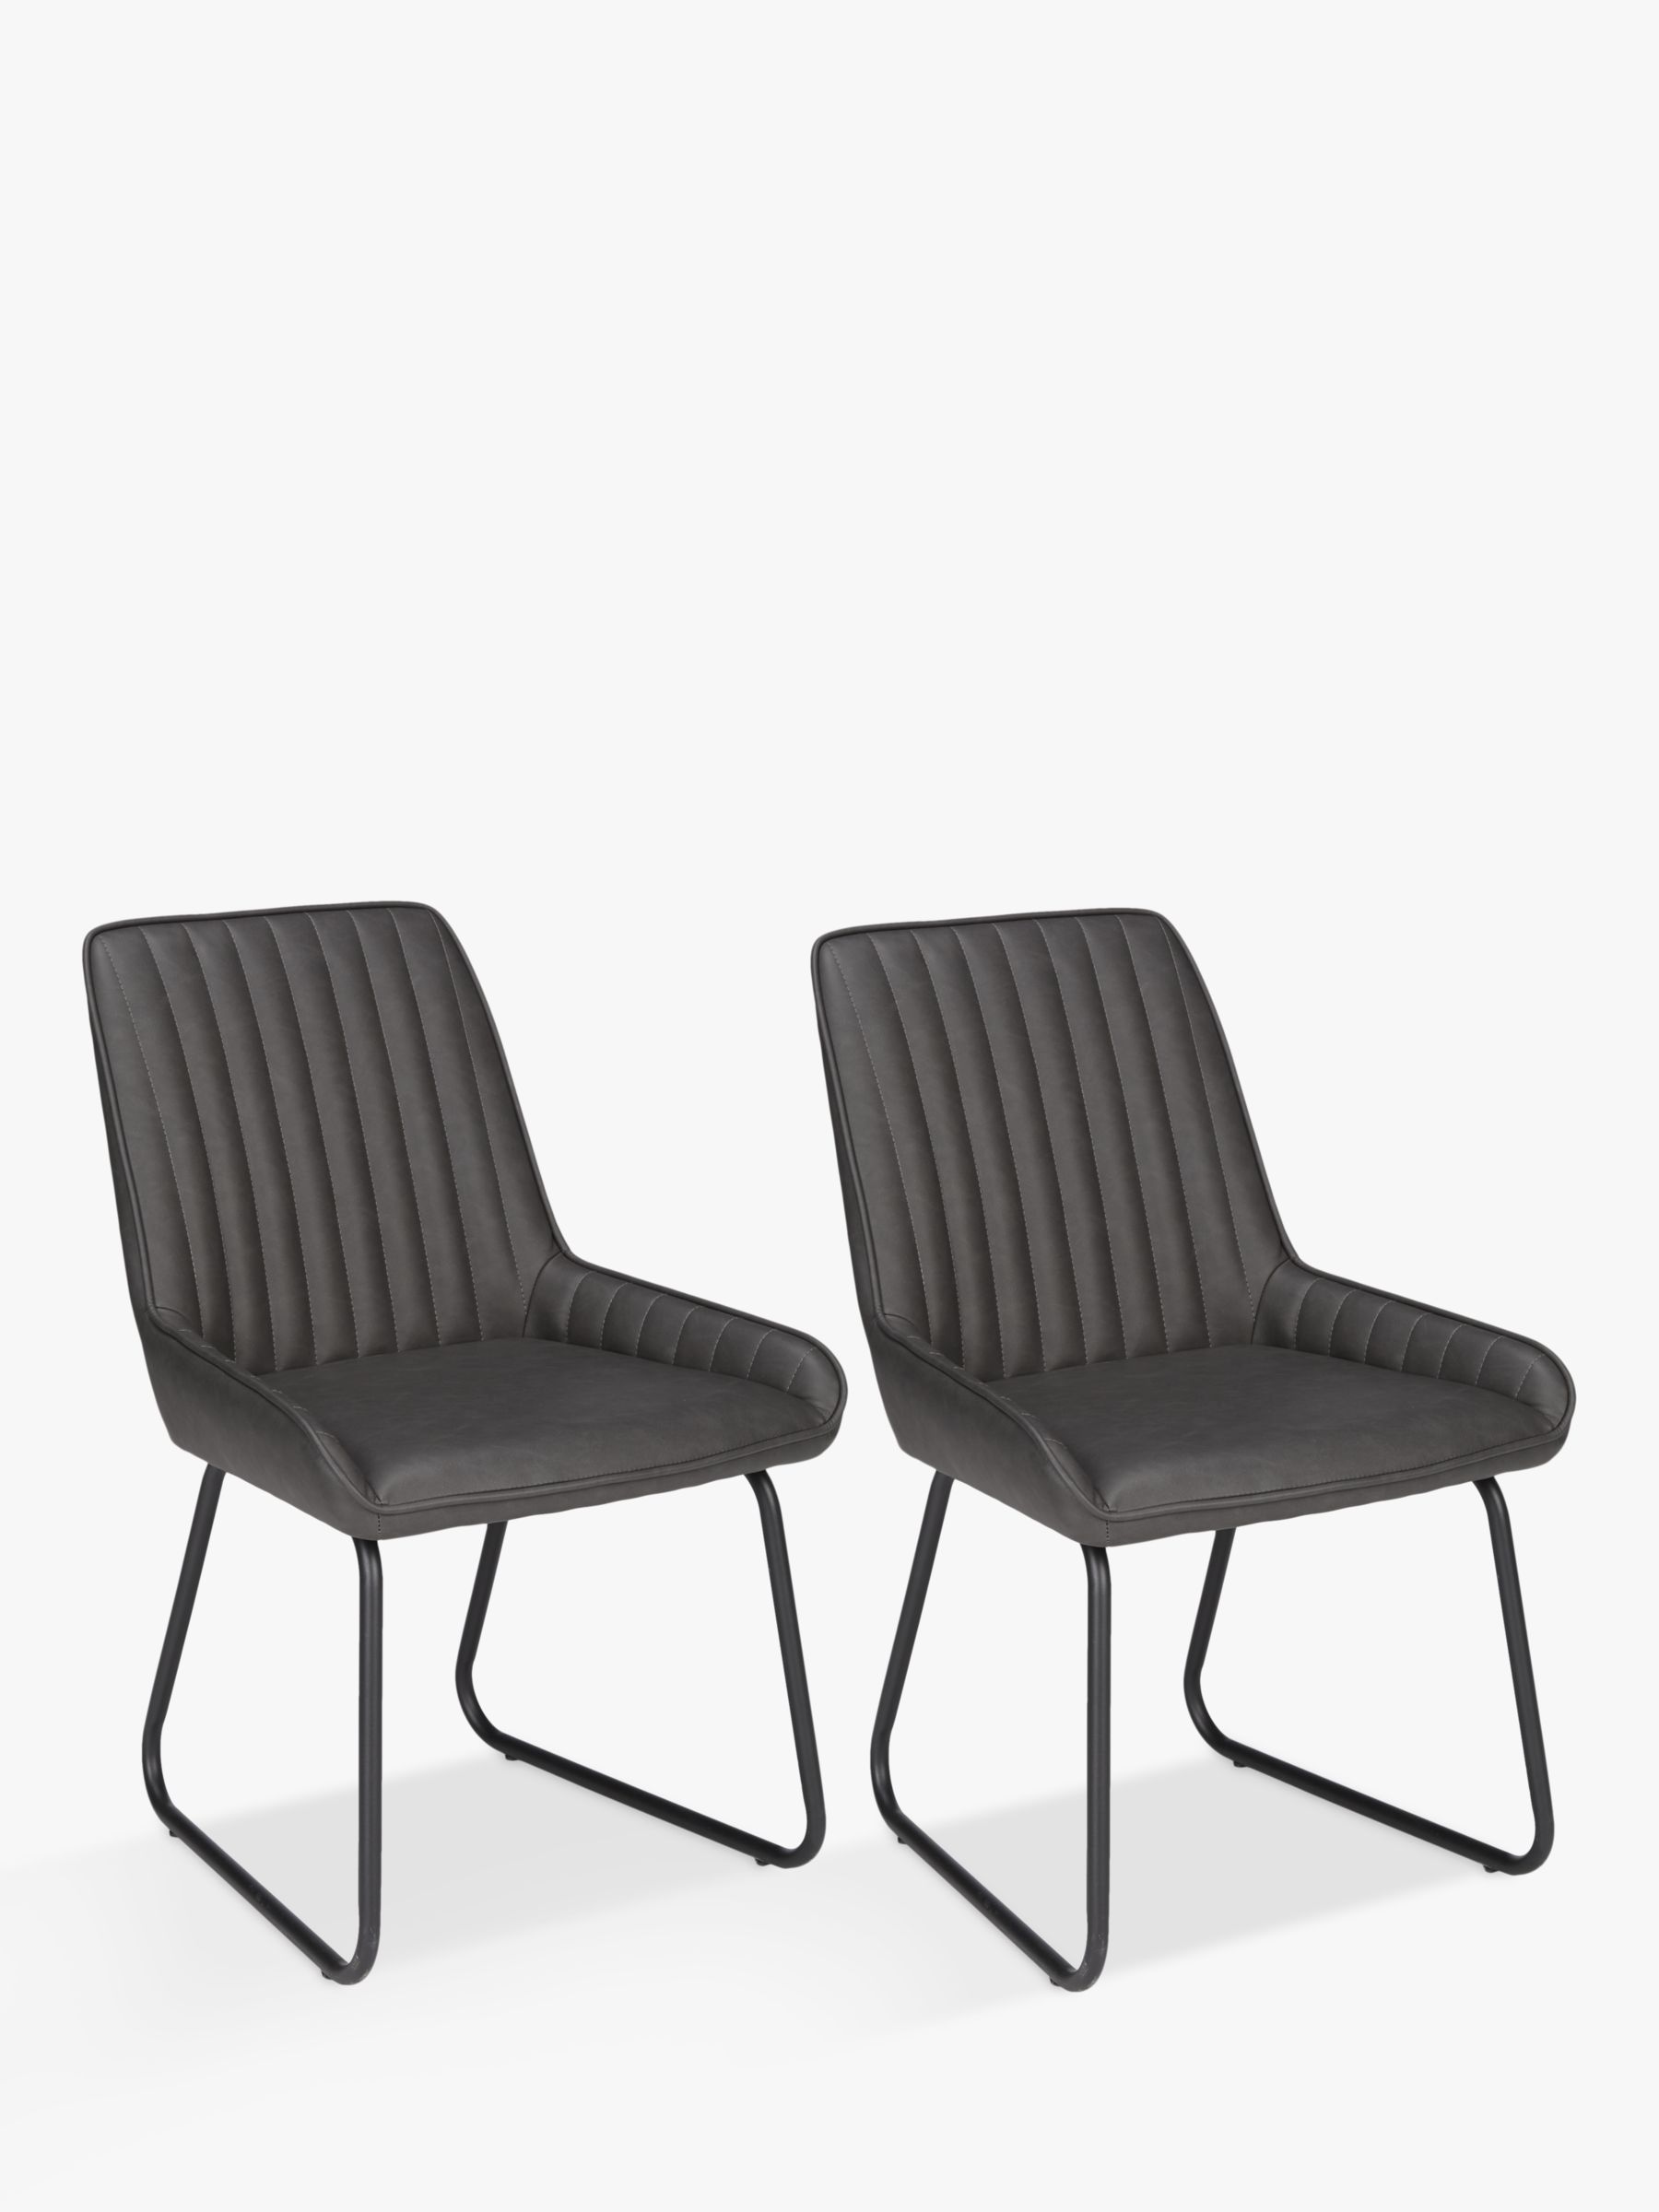 Photo of John lewis brooks side dining chairs set of 2